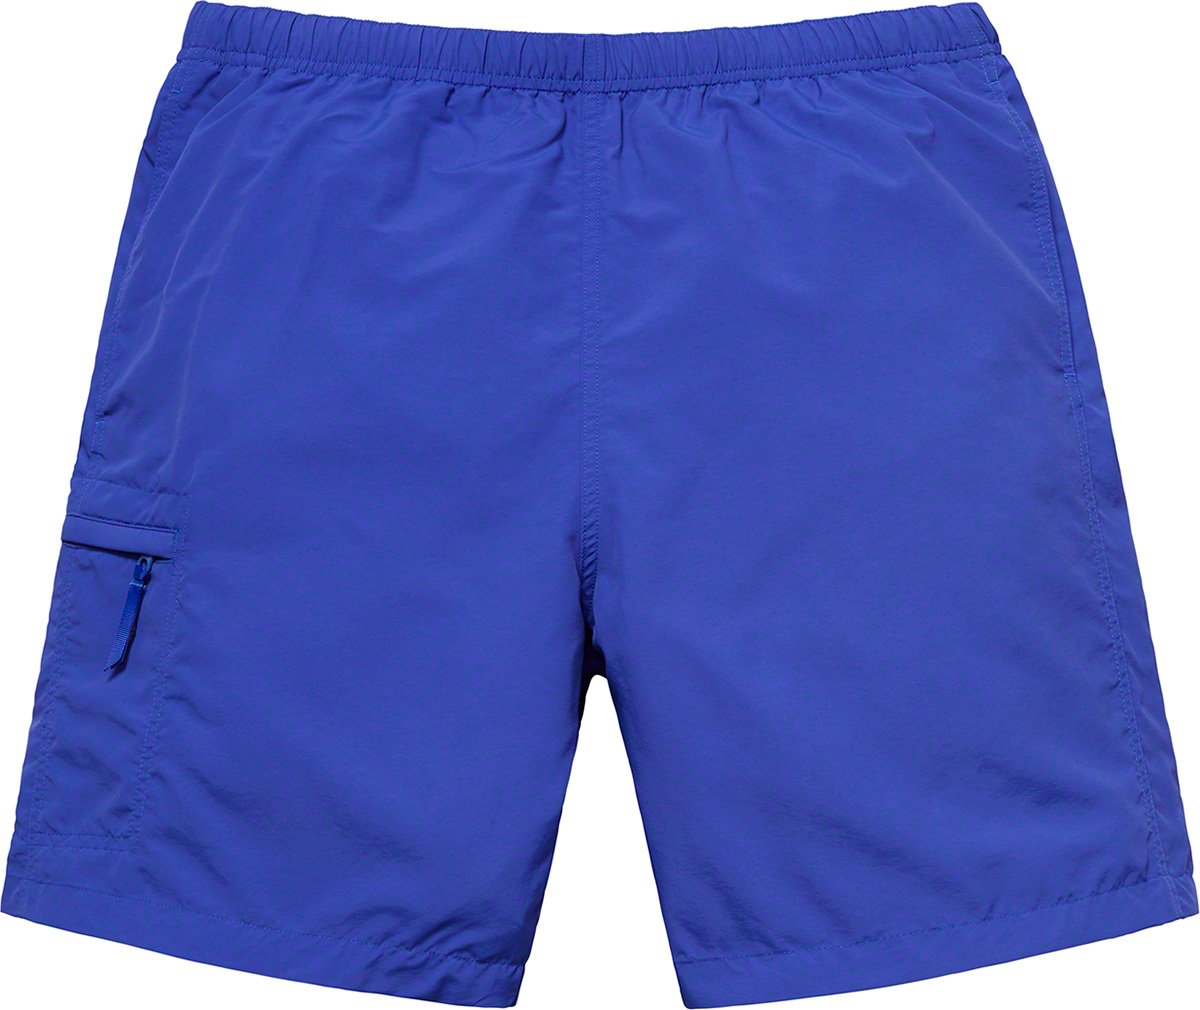 The 7 Best Running Shorts for Every Type of Runner - The Manual